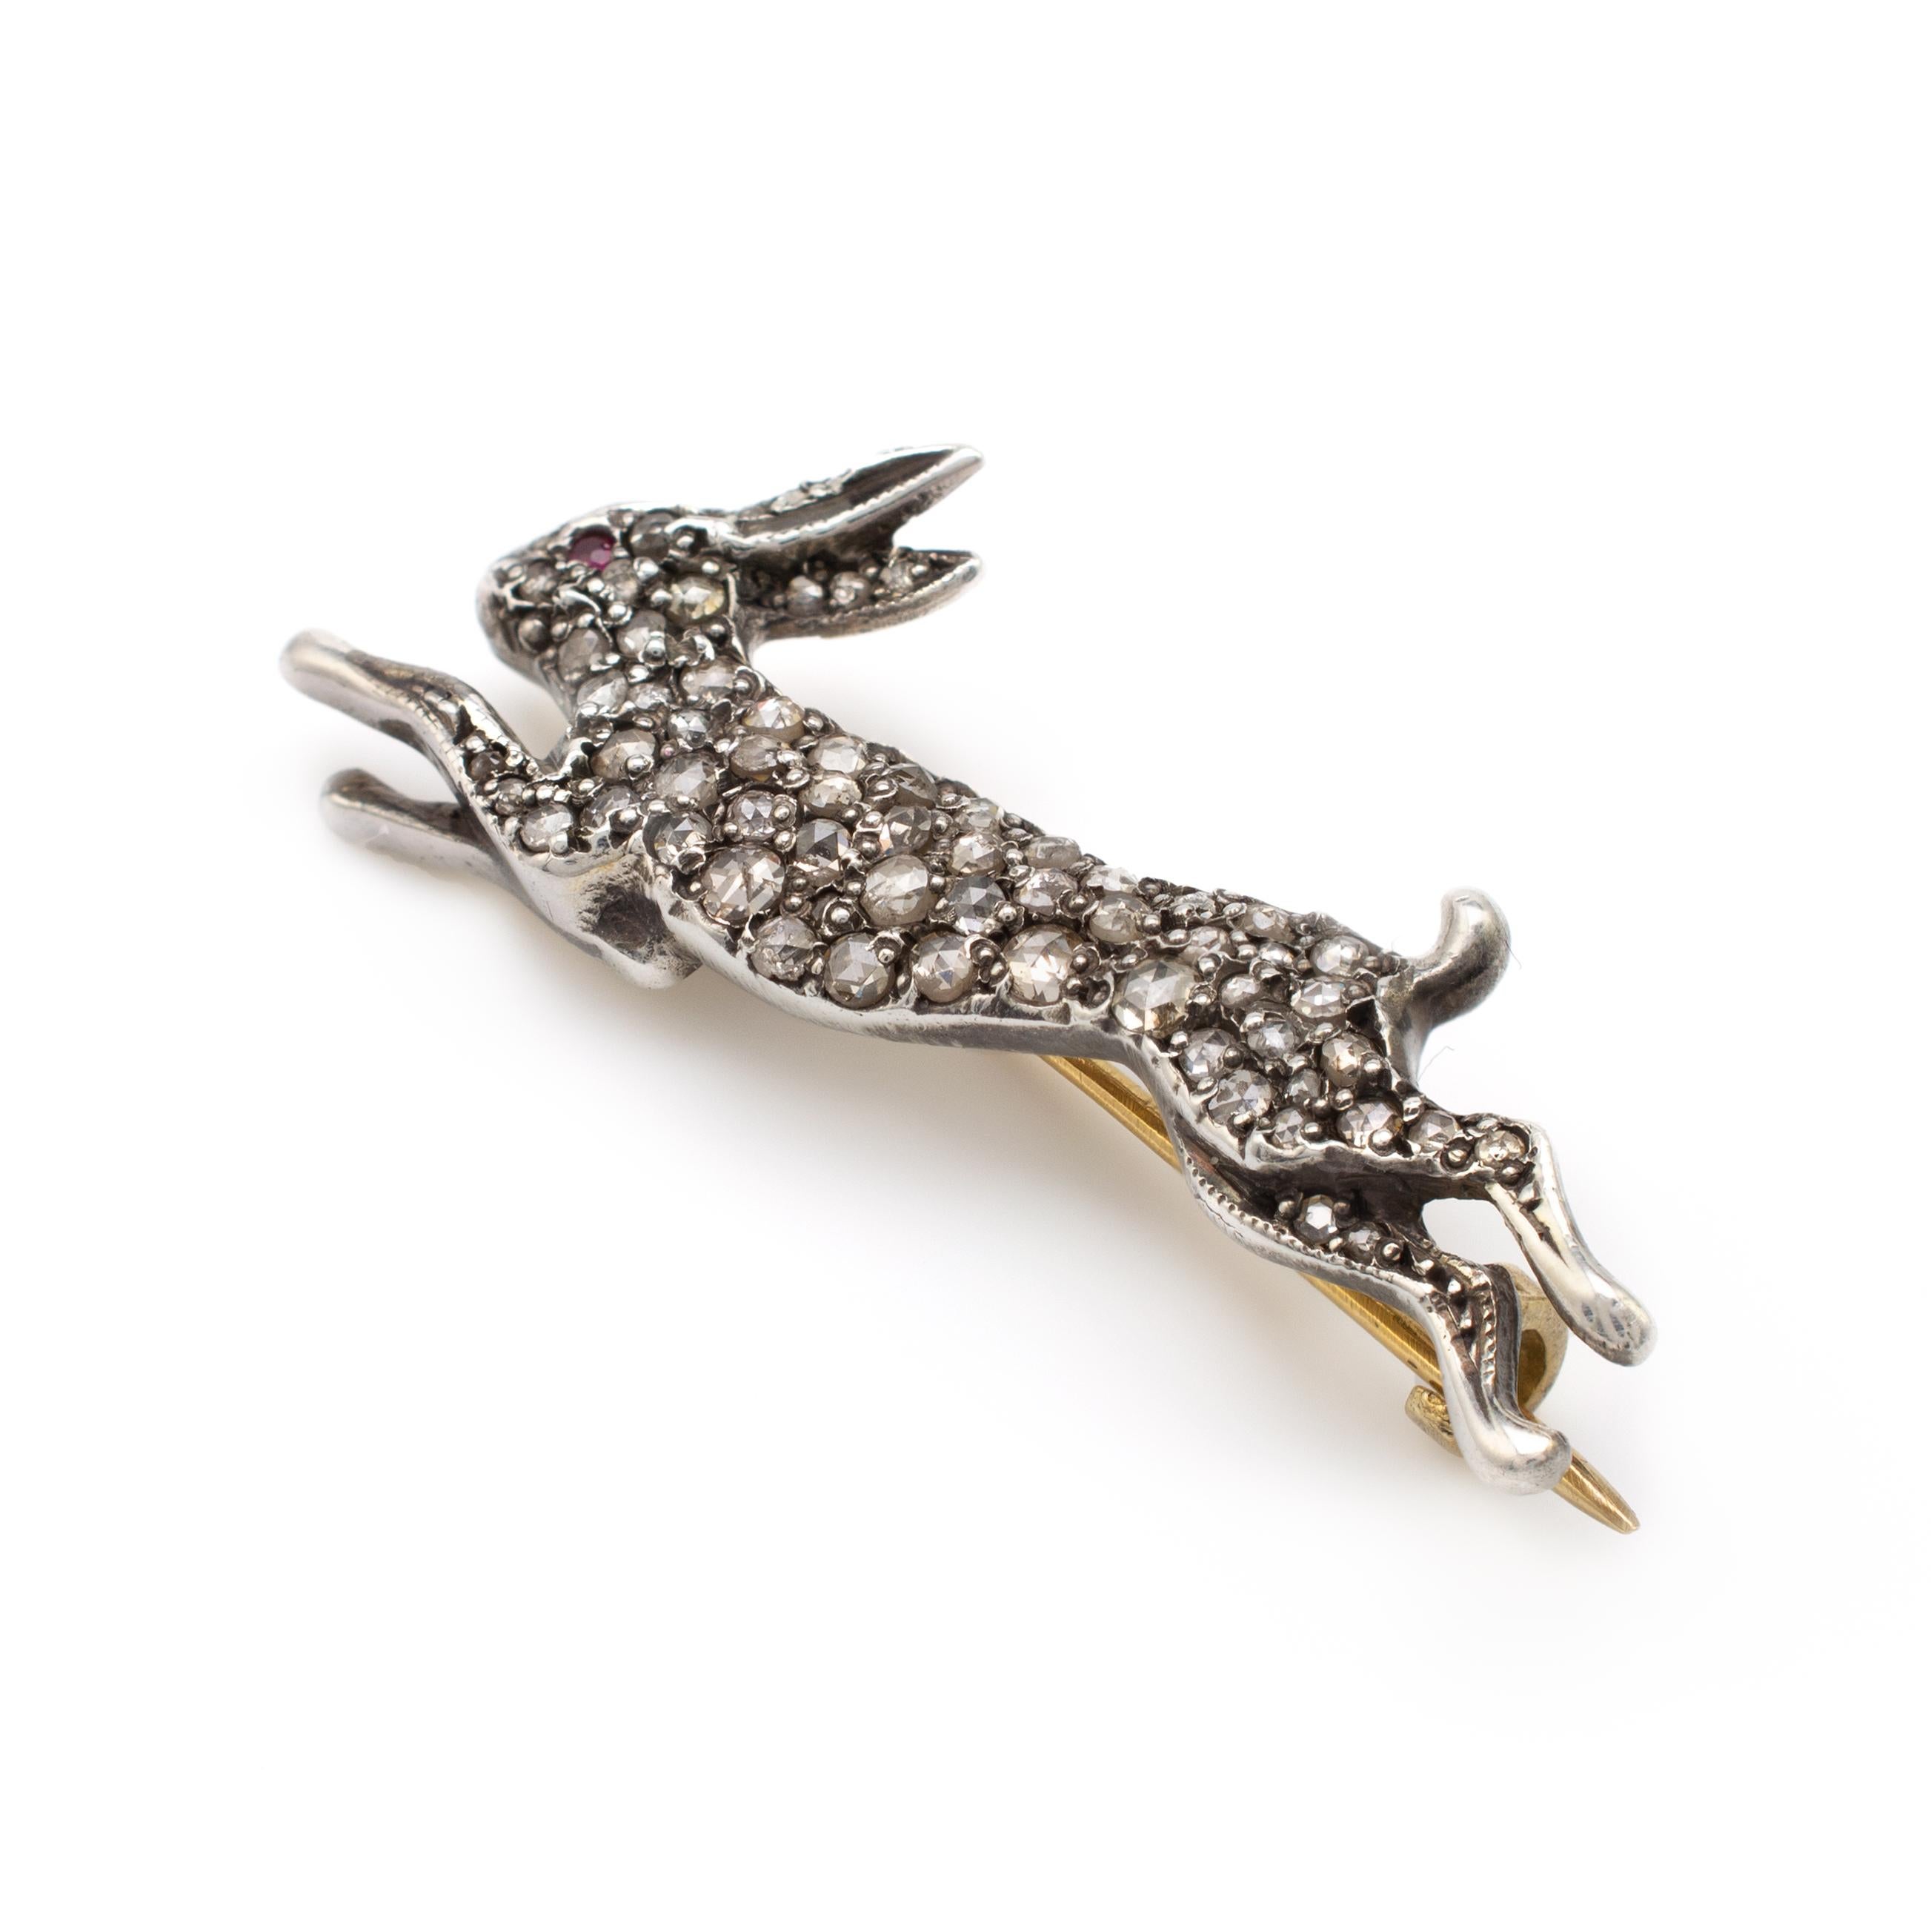 This antique diamond and ruby Hare brooch dates circa 1920

A superb piece for the collector, this running Hare brooch is encrusted throughout with graduating old and rose-cut diamonds estimated to weigh a total of 1.20 carats. The chunky stones are